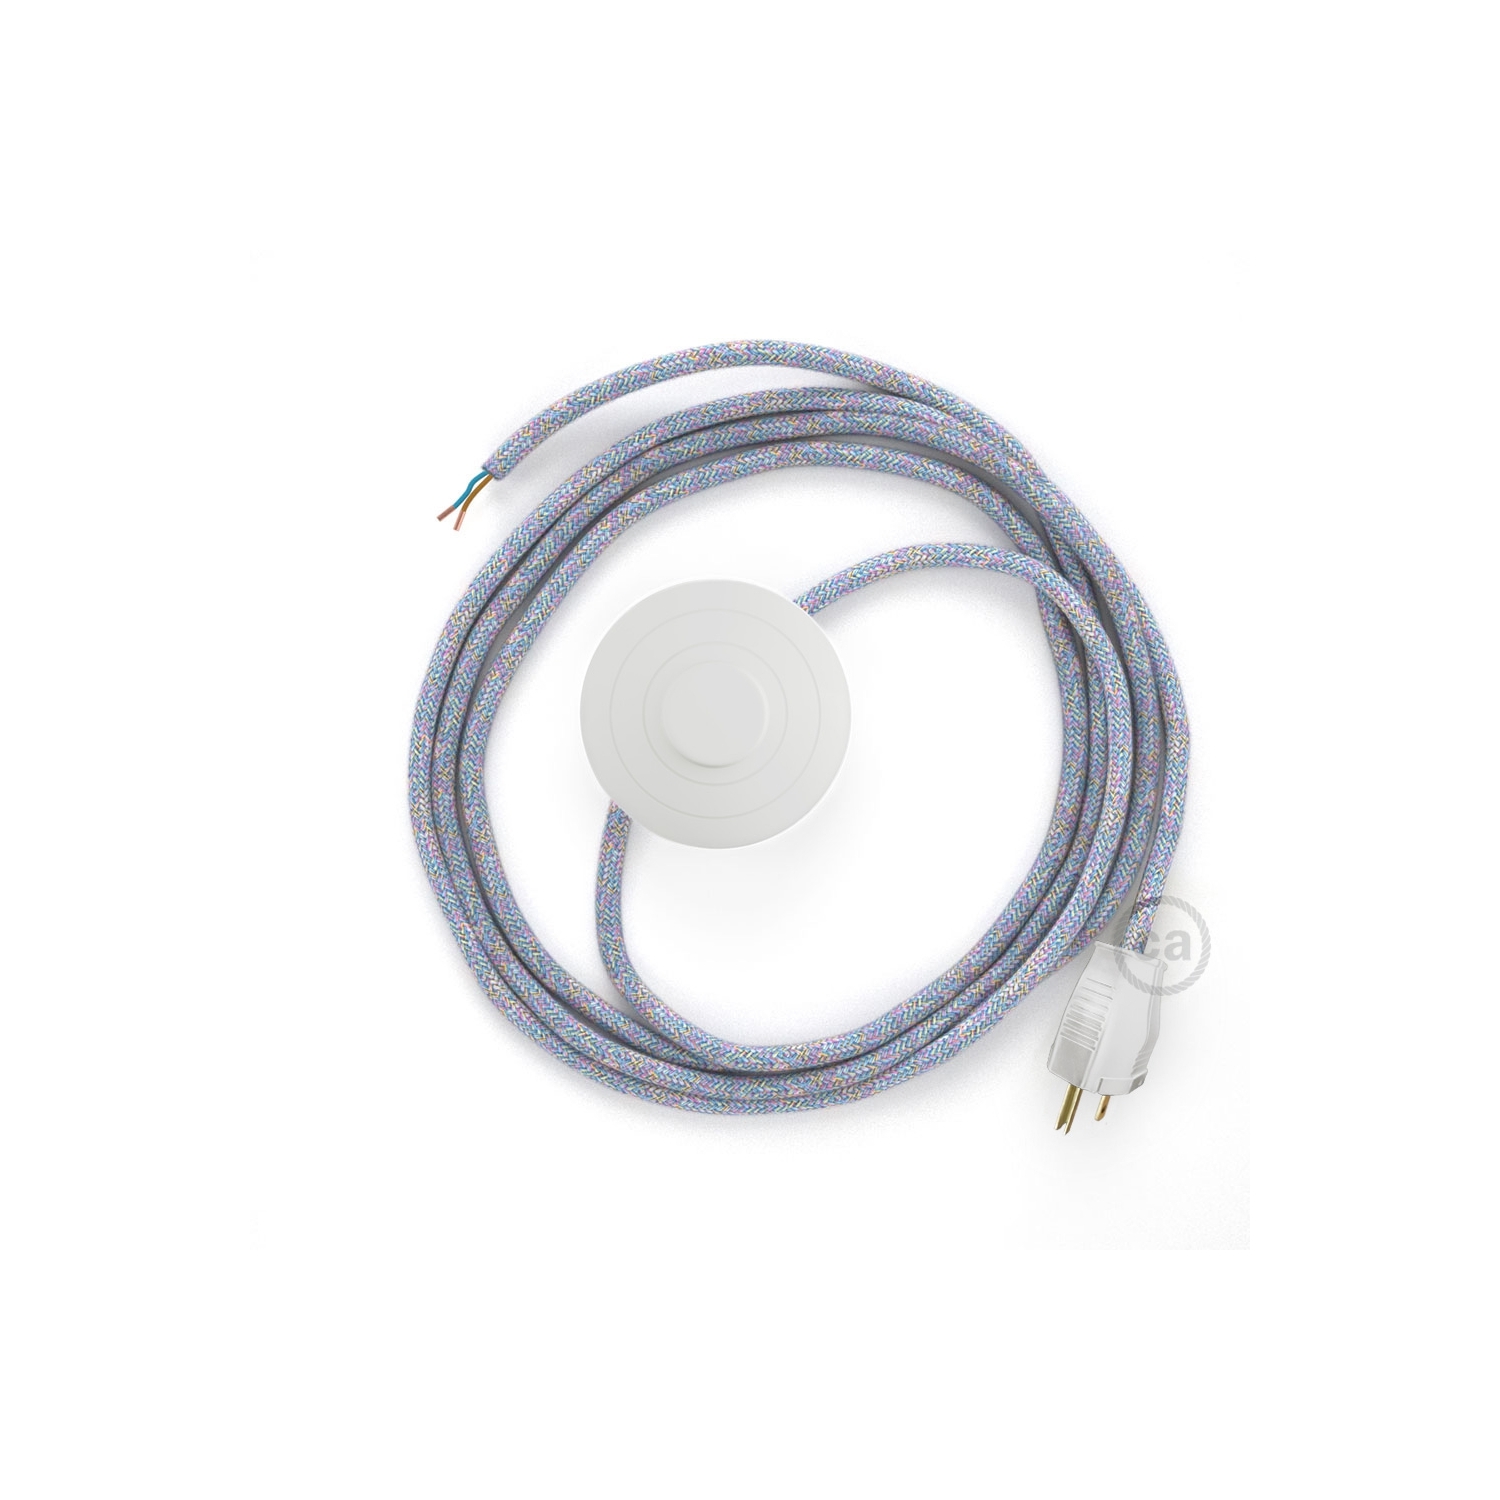 Power Cord with foot switch, RX09 Lollipop Cotton - Choose color of switch/plug